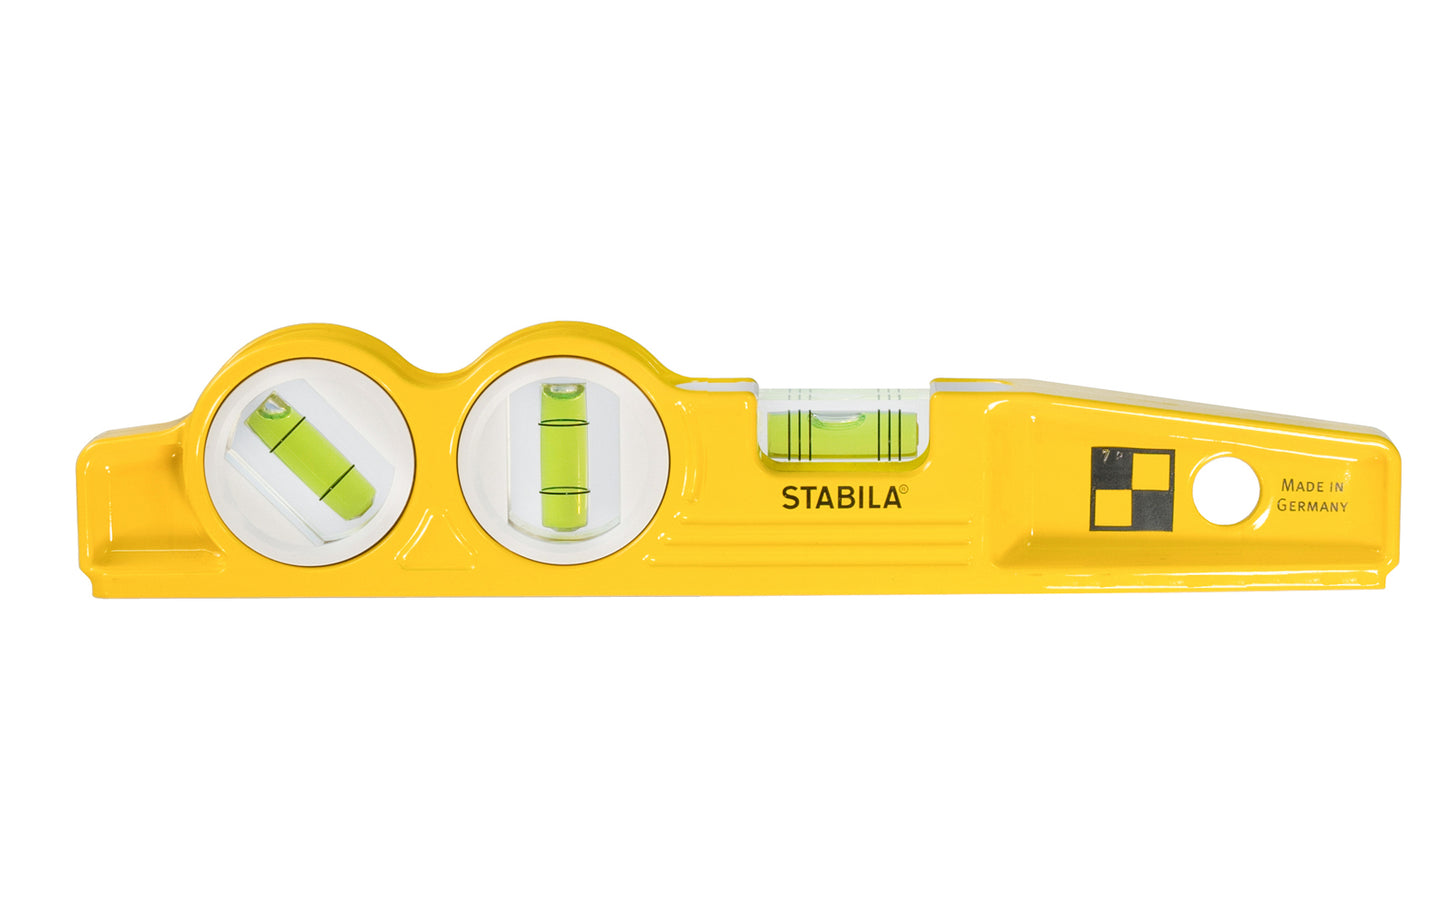 Stabila 10" (25 cm) Magnetic Torpedo Level With Three Vials ~ Type 81SMW45 Die Cast - Model No. 25245 - Compact, tough, die-cast aluminum profile torpedo level with a level vial with 1% & 2% slope indication rings, a vertical/plumb vial & an additional dedicated 45° vial for checking angle